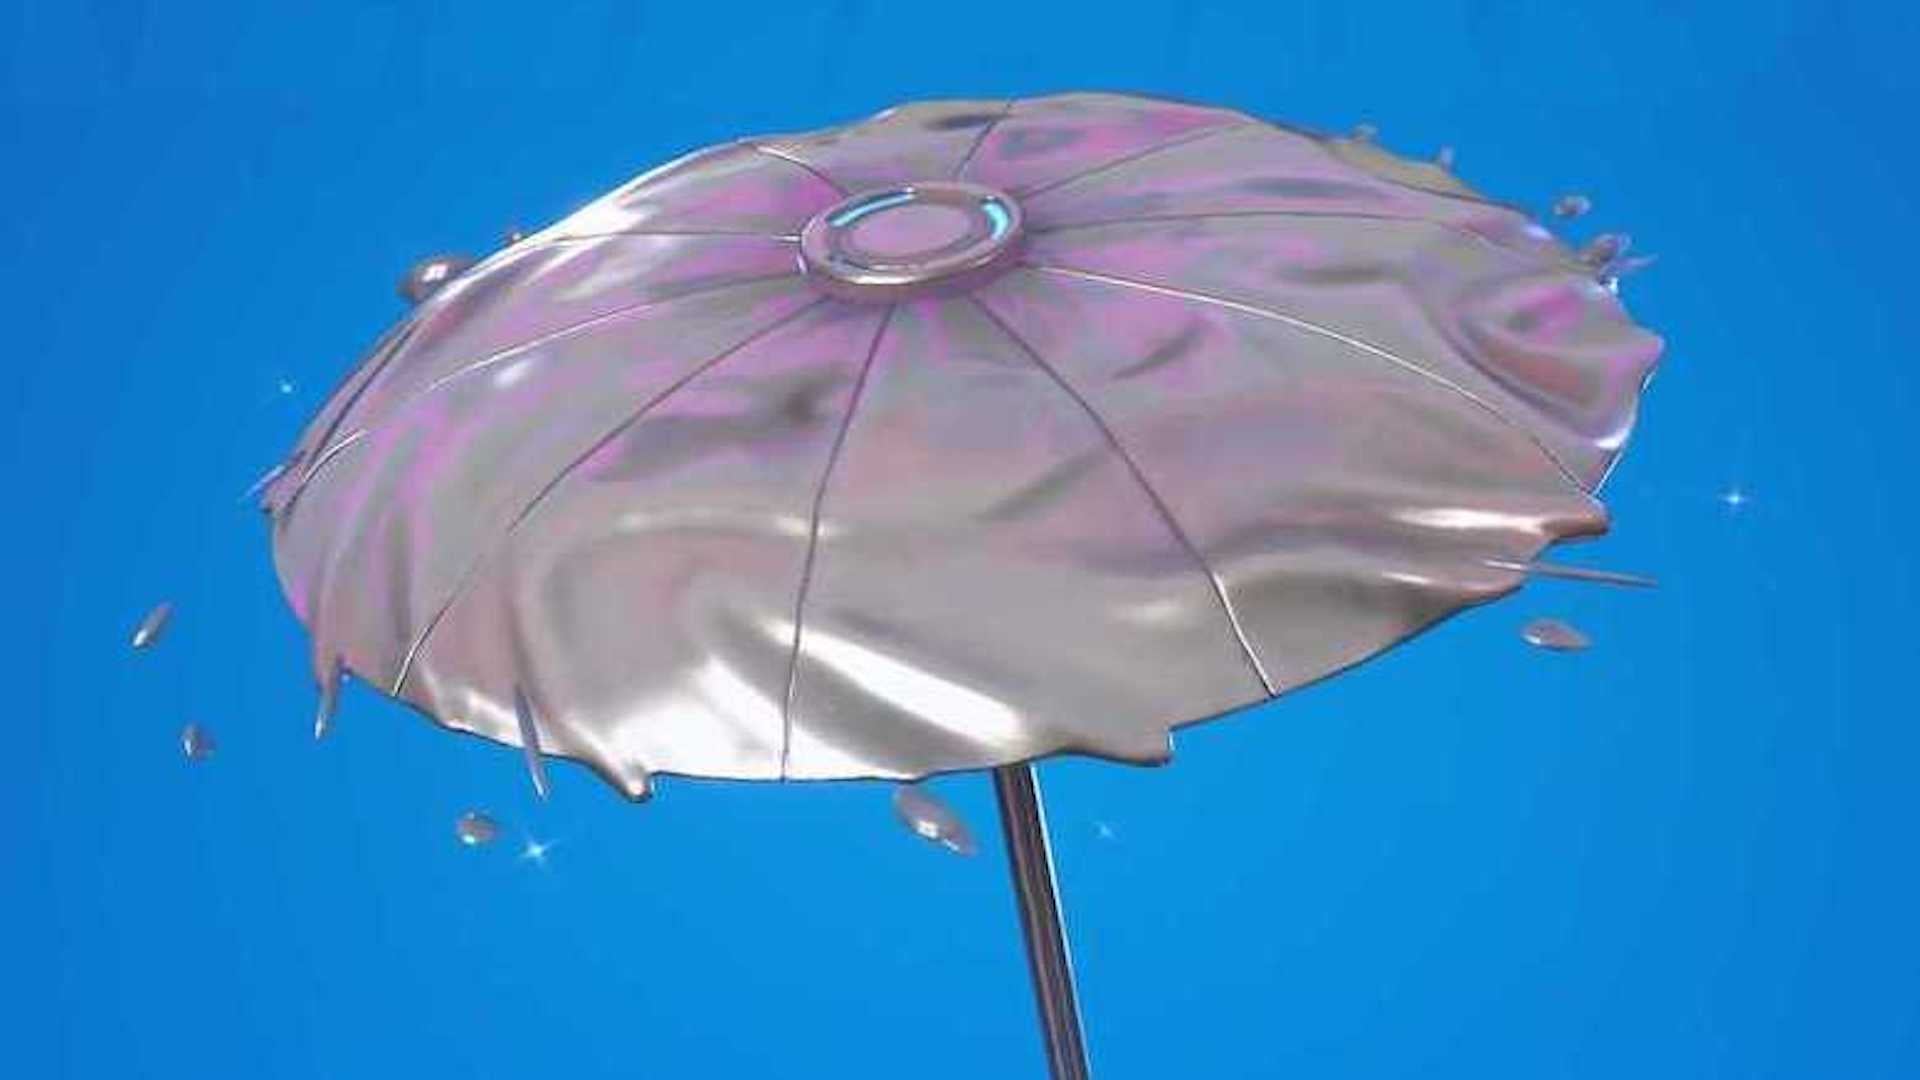 Image for Fortnite new Victory Umbrella: The latest Victory Umbrella in this Fortnite season